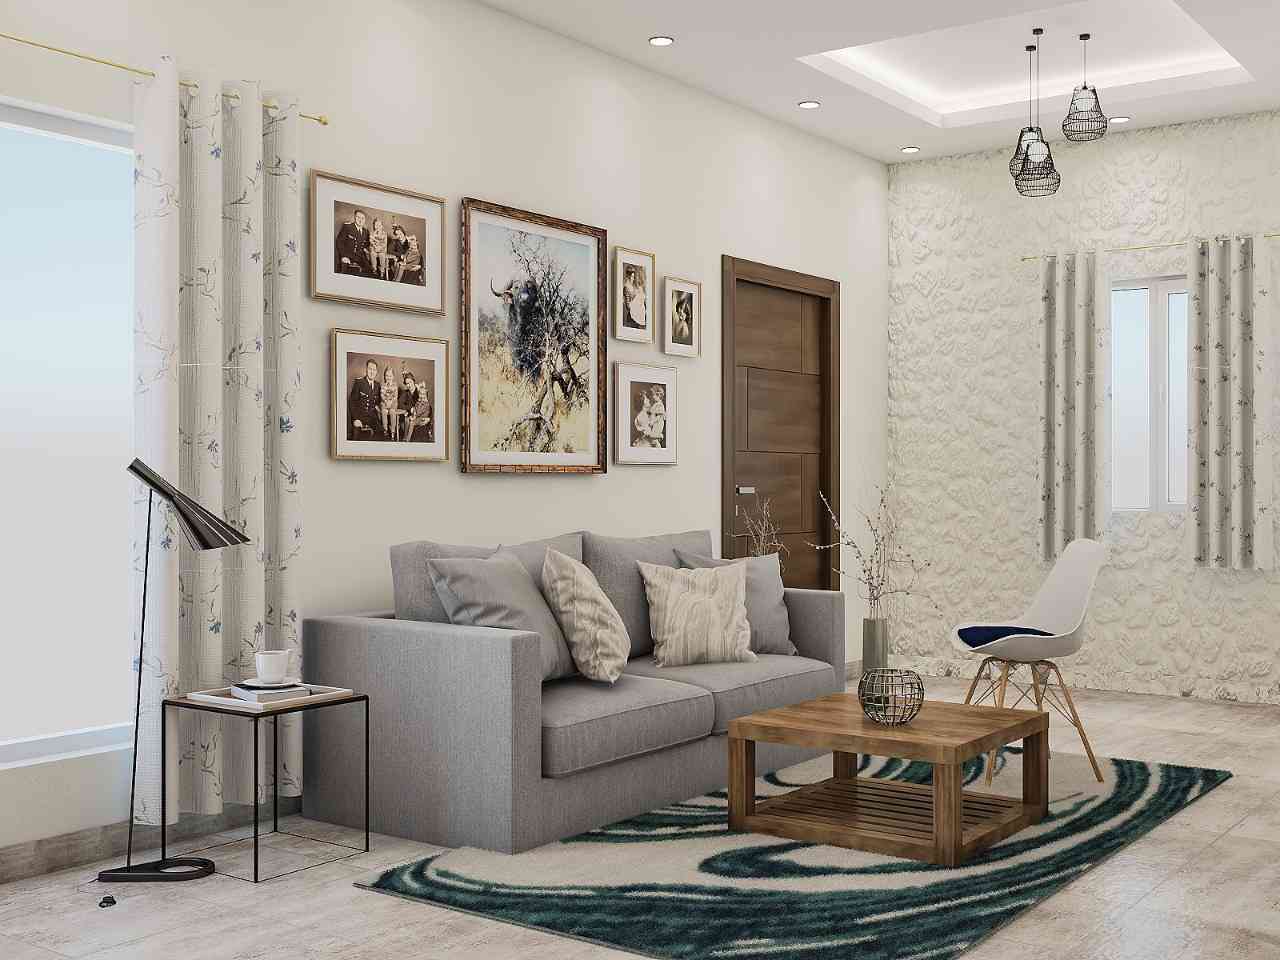 Modern Blue And Grey Living Room Design With Wall Gallery